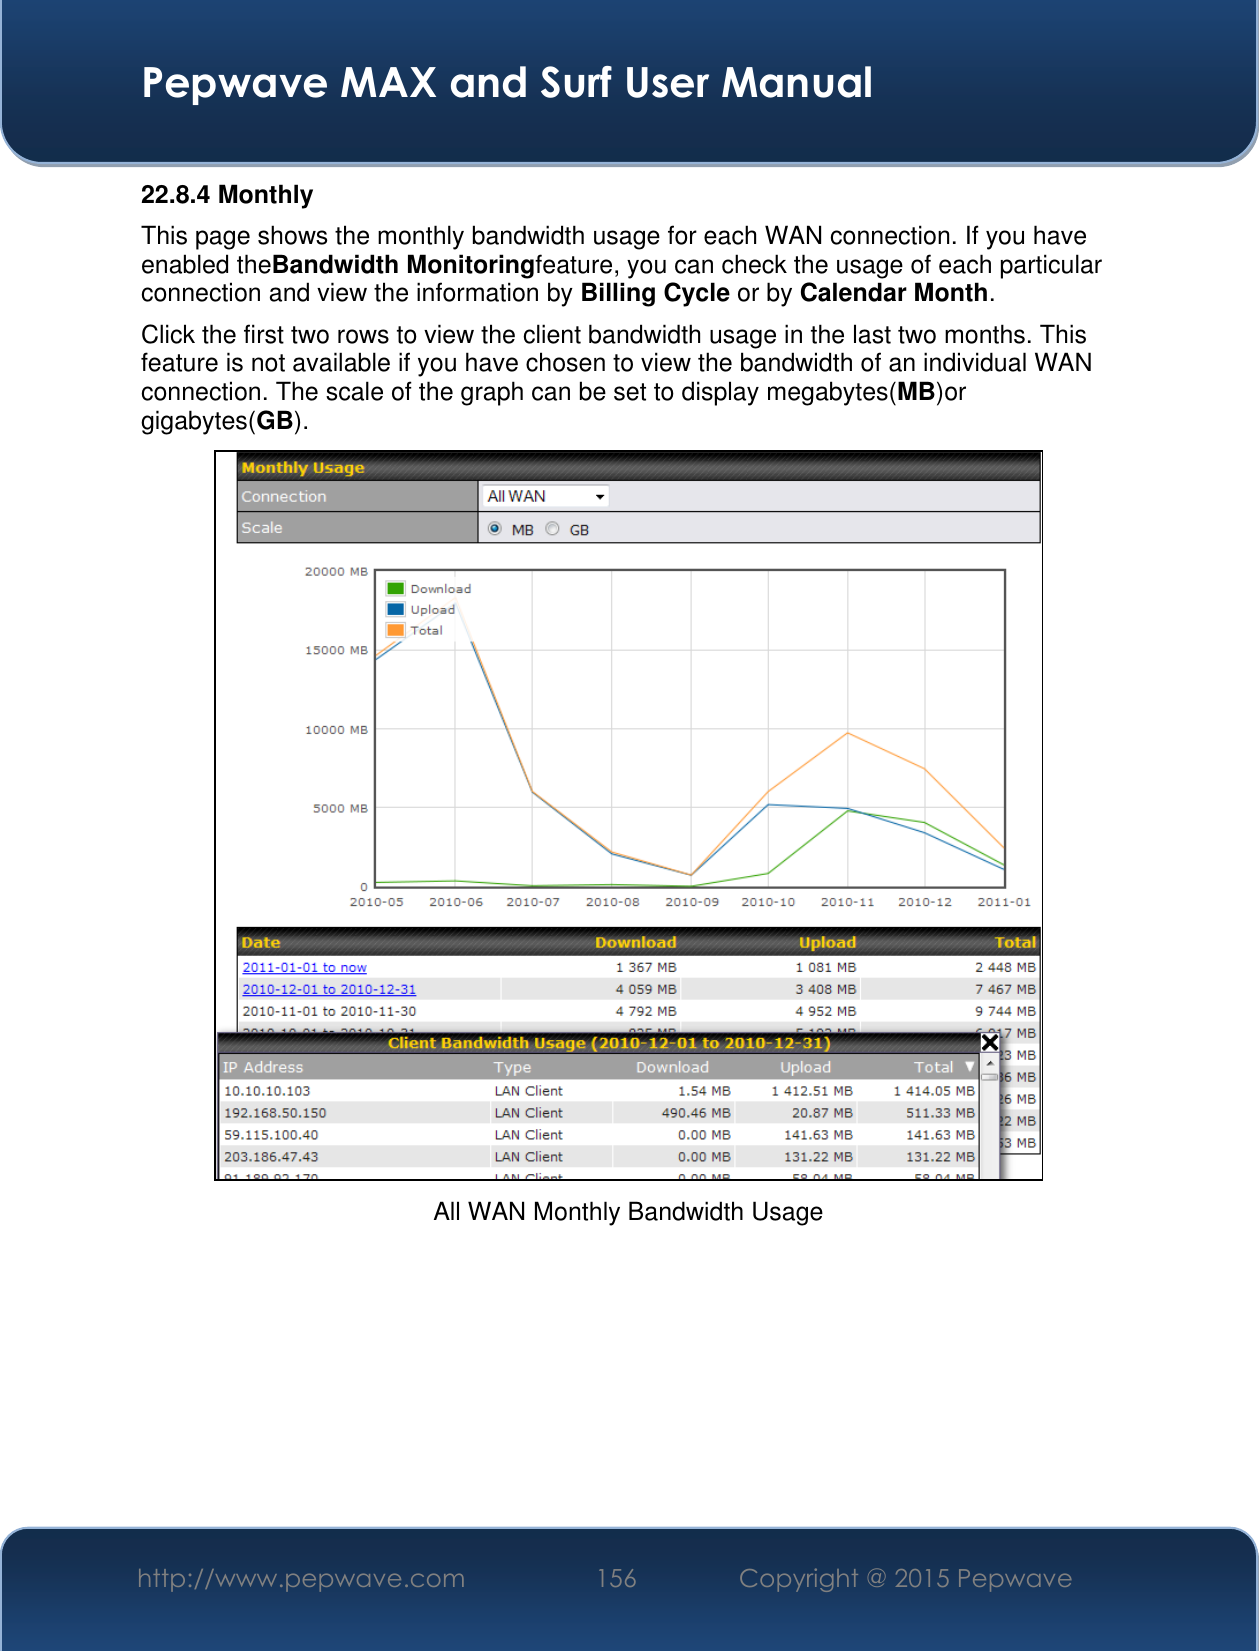  Pepwave MAX and Surf User Manual http://www.pepwave.com 156 Copyright @ 2015 Pepwave   22.8.4 Monthly This page shows the monthly bandwidth usage for each WAN connection. If you have enabled theBandwidth Monitoringfeature, you can check the usage of each particular connection and view the information by Billing Cycle or by Calendar Month. Click the first two rows to view the client bandwidth usage in the last two months. This feature is not available if you have chosen to view the bandwidth of an individual WAN connection. The scale of the graph can be set to display megabytes(MB)or gigabytes(GB).  All WAN Monthly Bandwidth Usage 